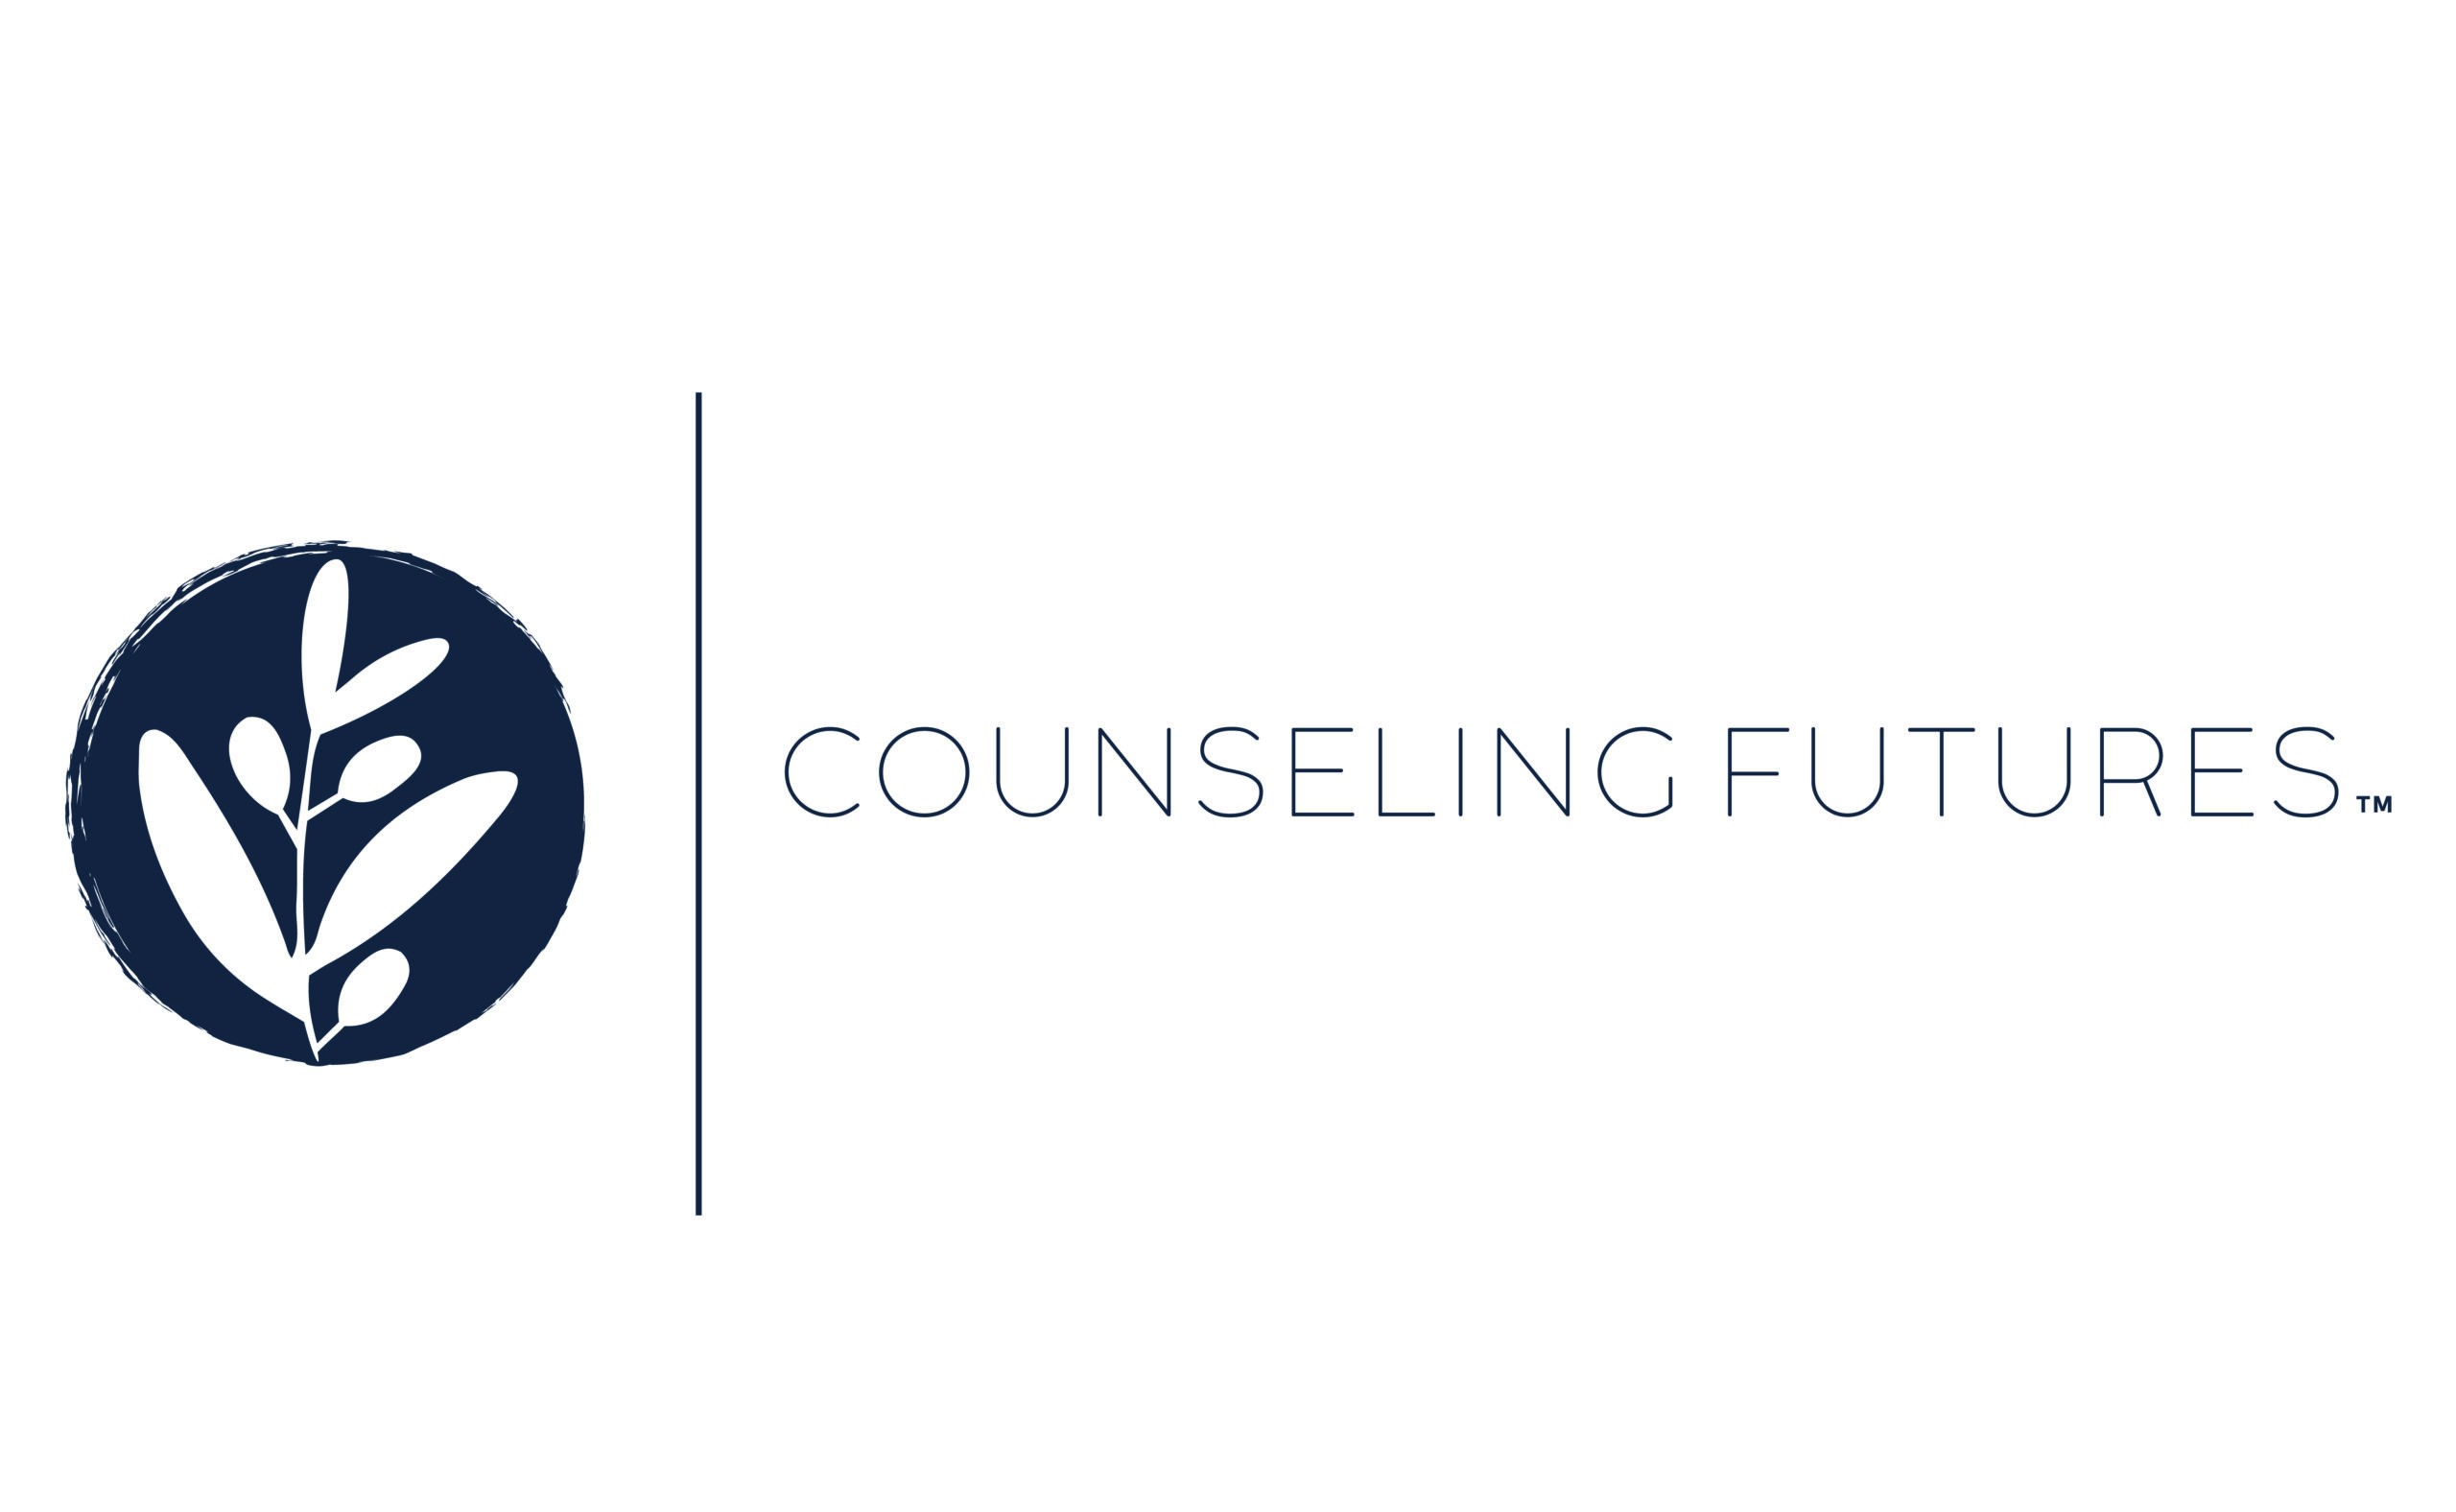  Counseling Futures